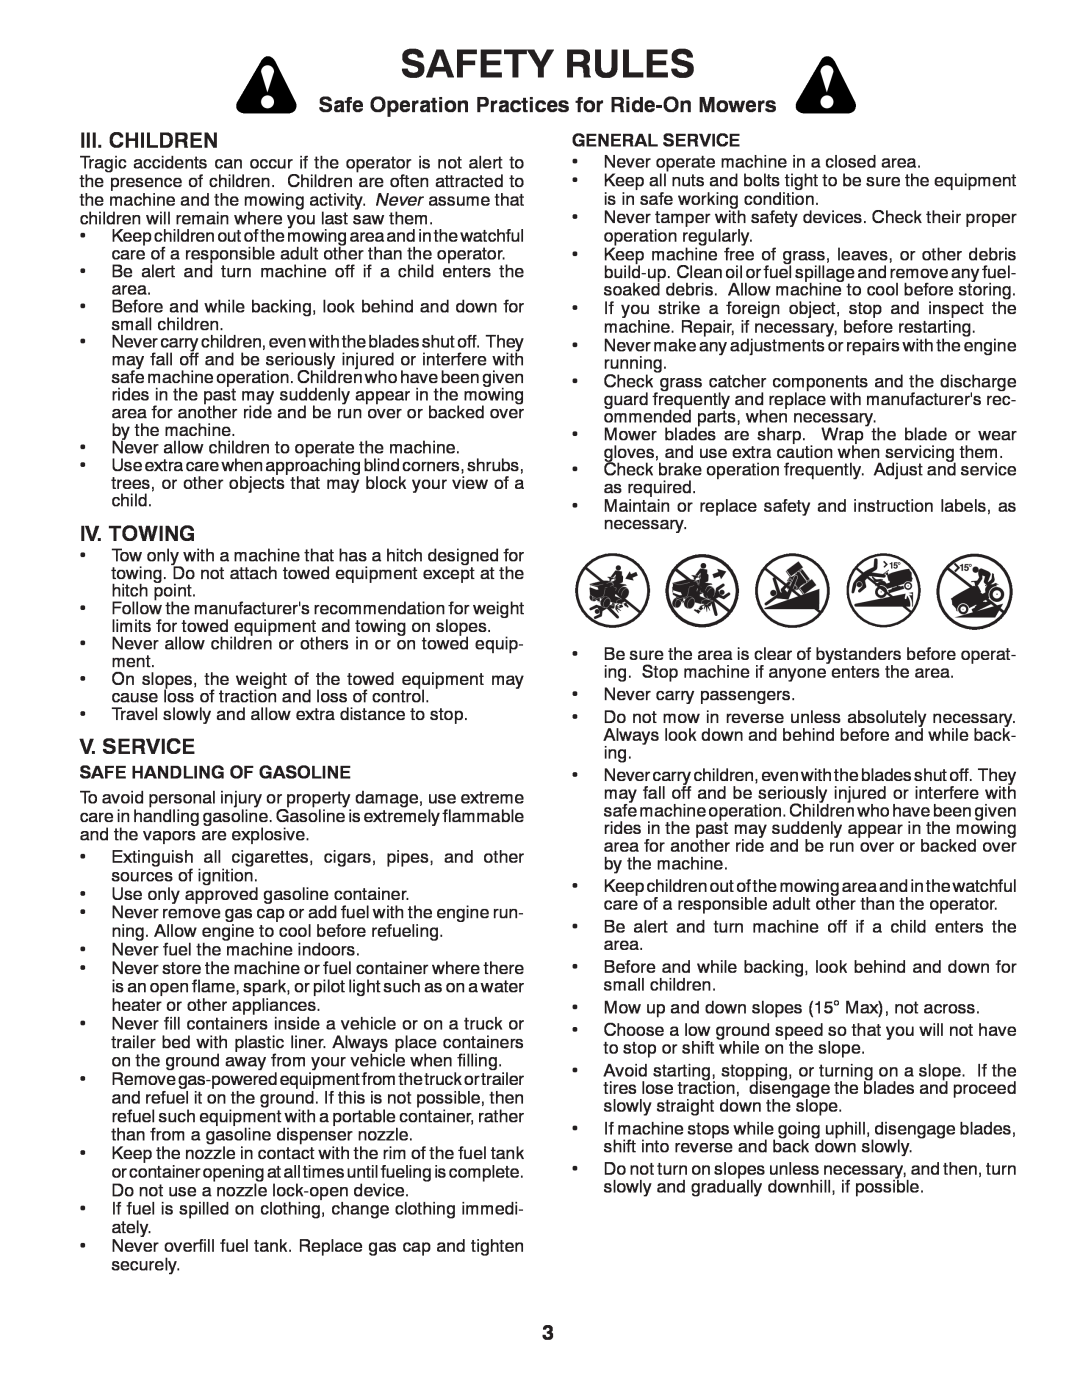 Husqvarna LT1597 manual Iii. Children, Iv. Towing, V. Service, Safety Rules, Safe Operation Practices for Ride-OnMowers 